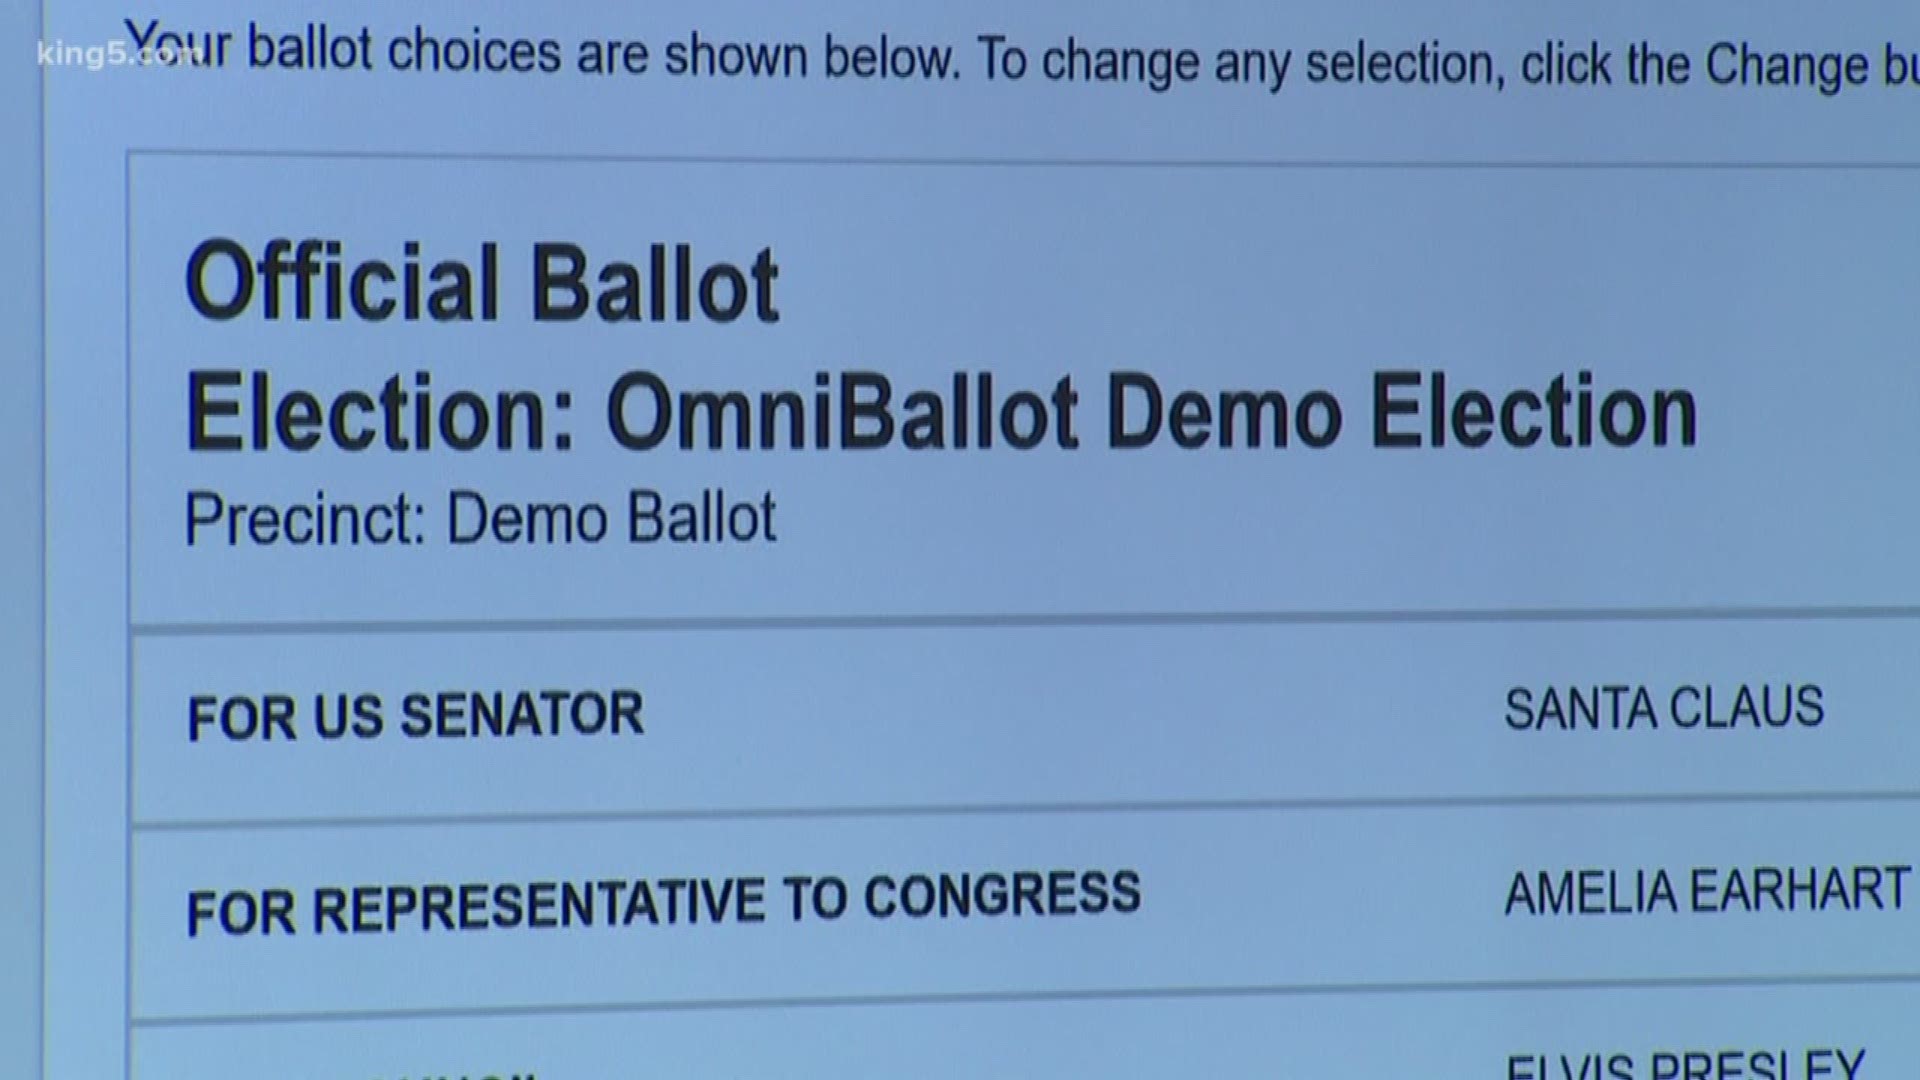 A pilot program will allow registered King County voters to vote on their mobile devices.